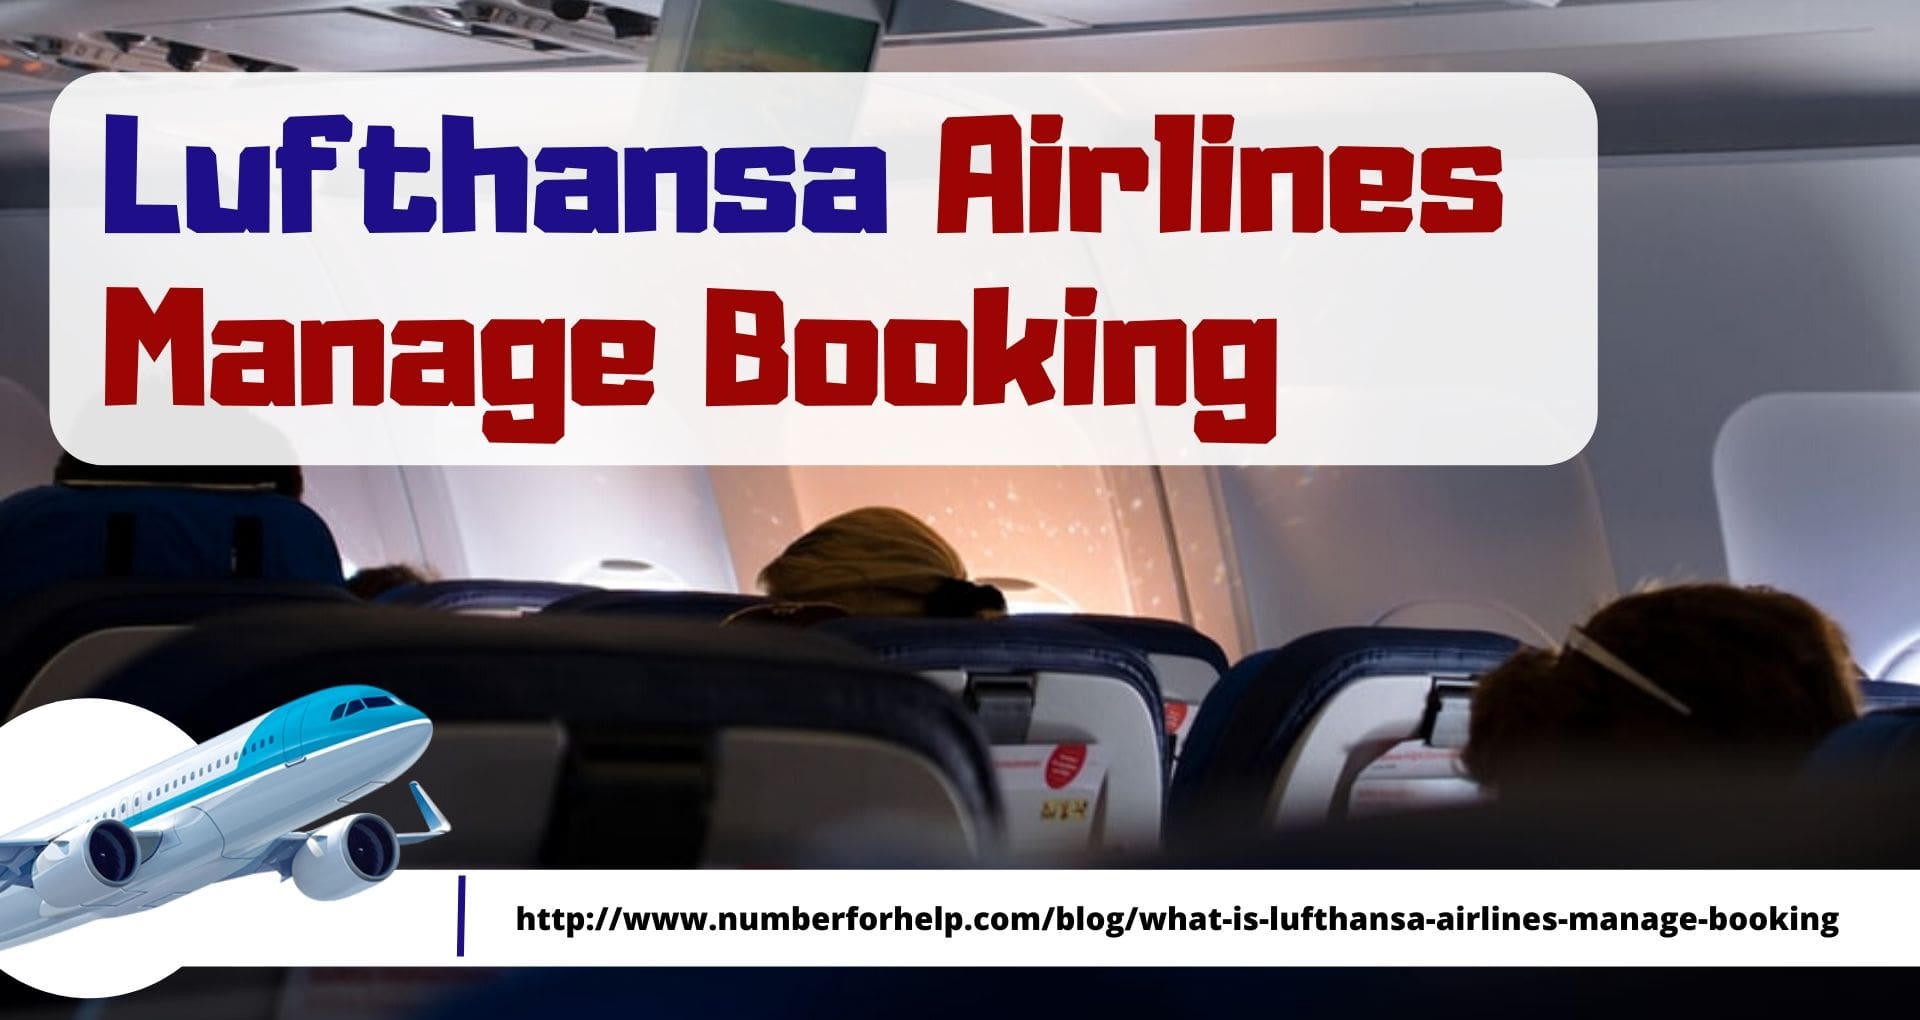 2019-12-18-12-07-20Lufthansa Airlines Manage Booking (2)